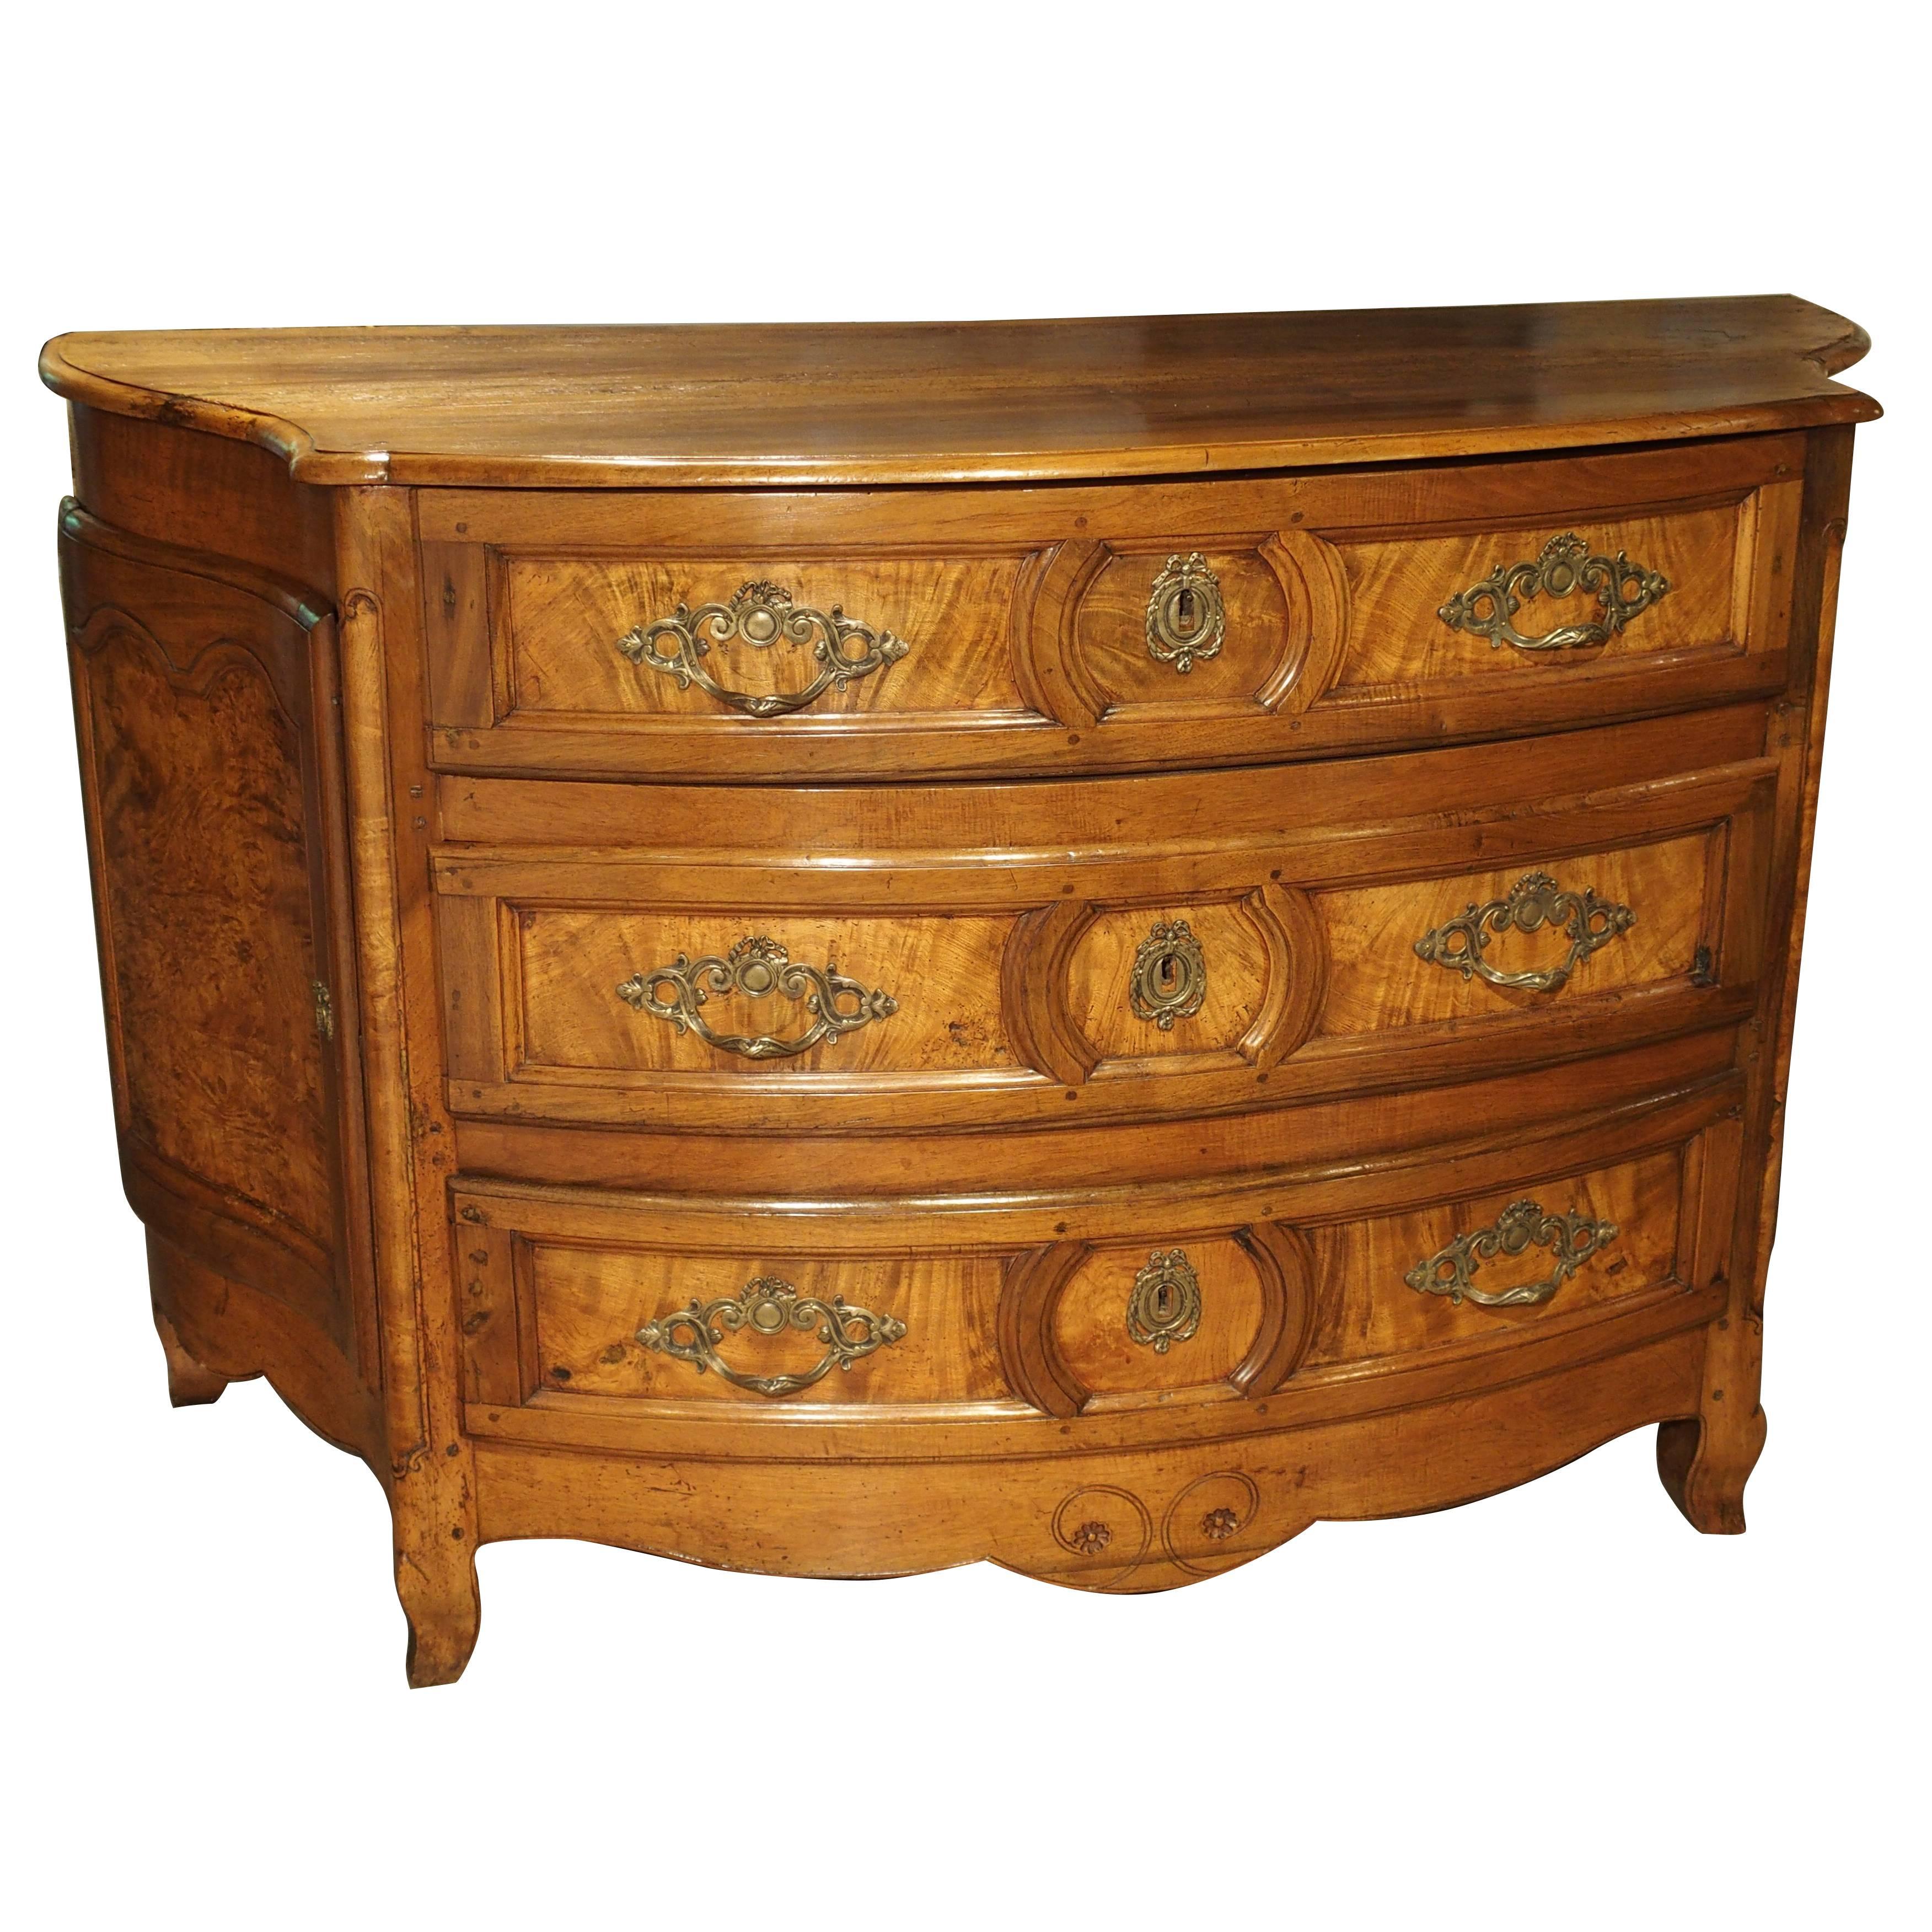 Rare 18th Century Commode with Side Doors Walnut, Rhone Valley, France